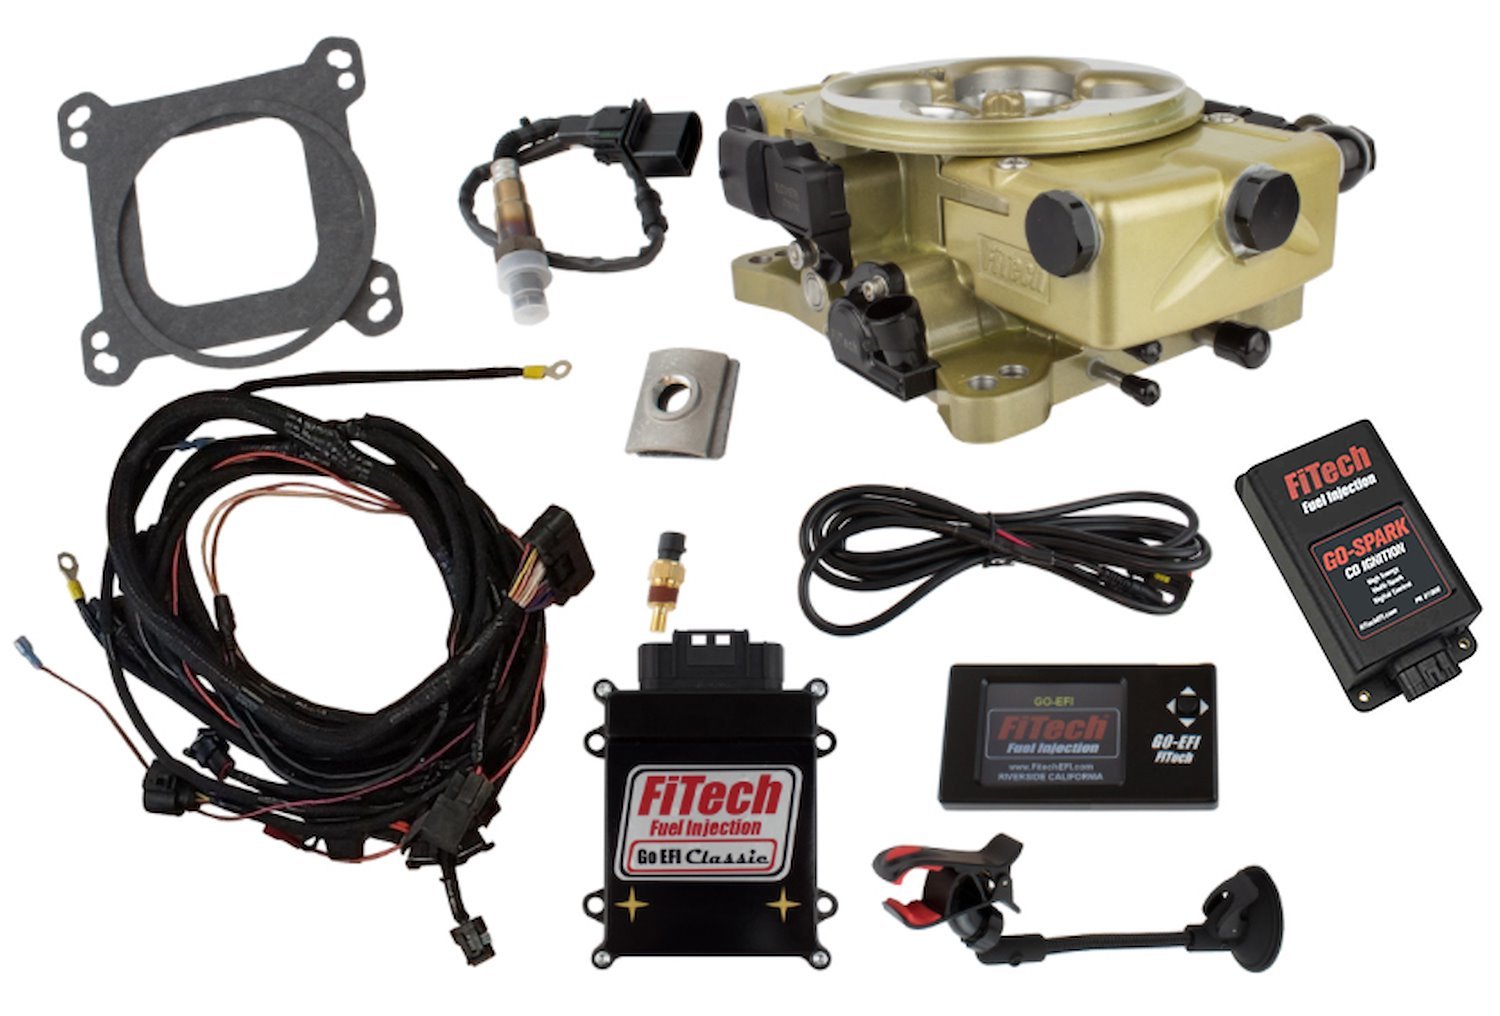 Go EFI Classic 650 HP Throttle Body Fuel Injection Master Kit [with CDI Box] Classic Gold